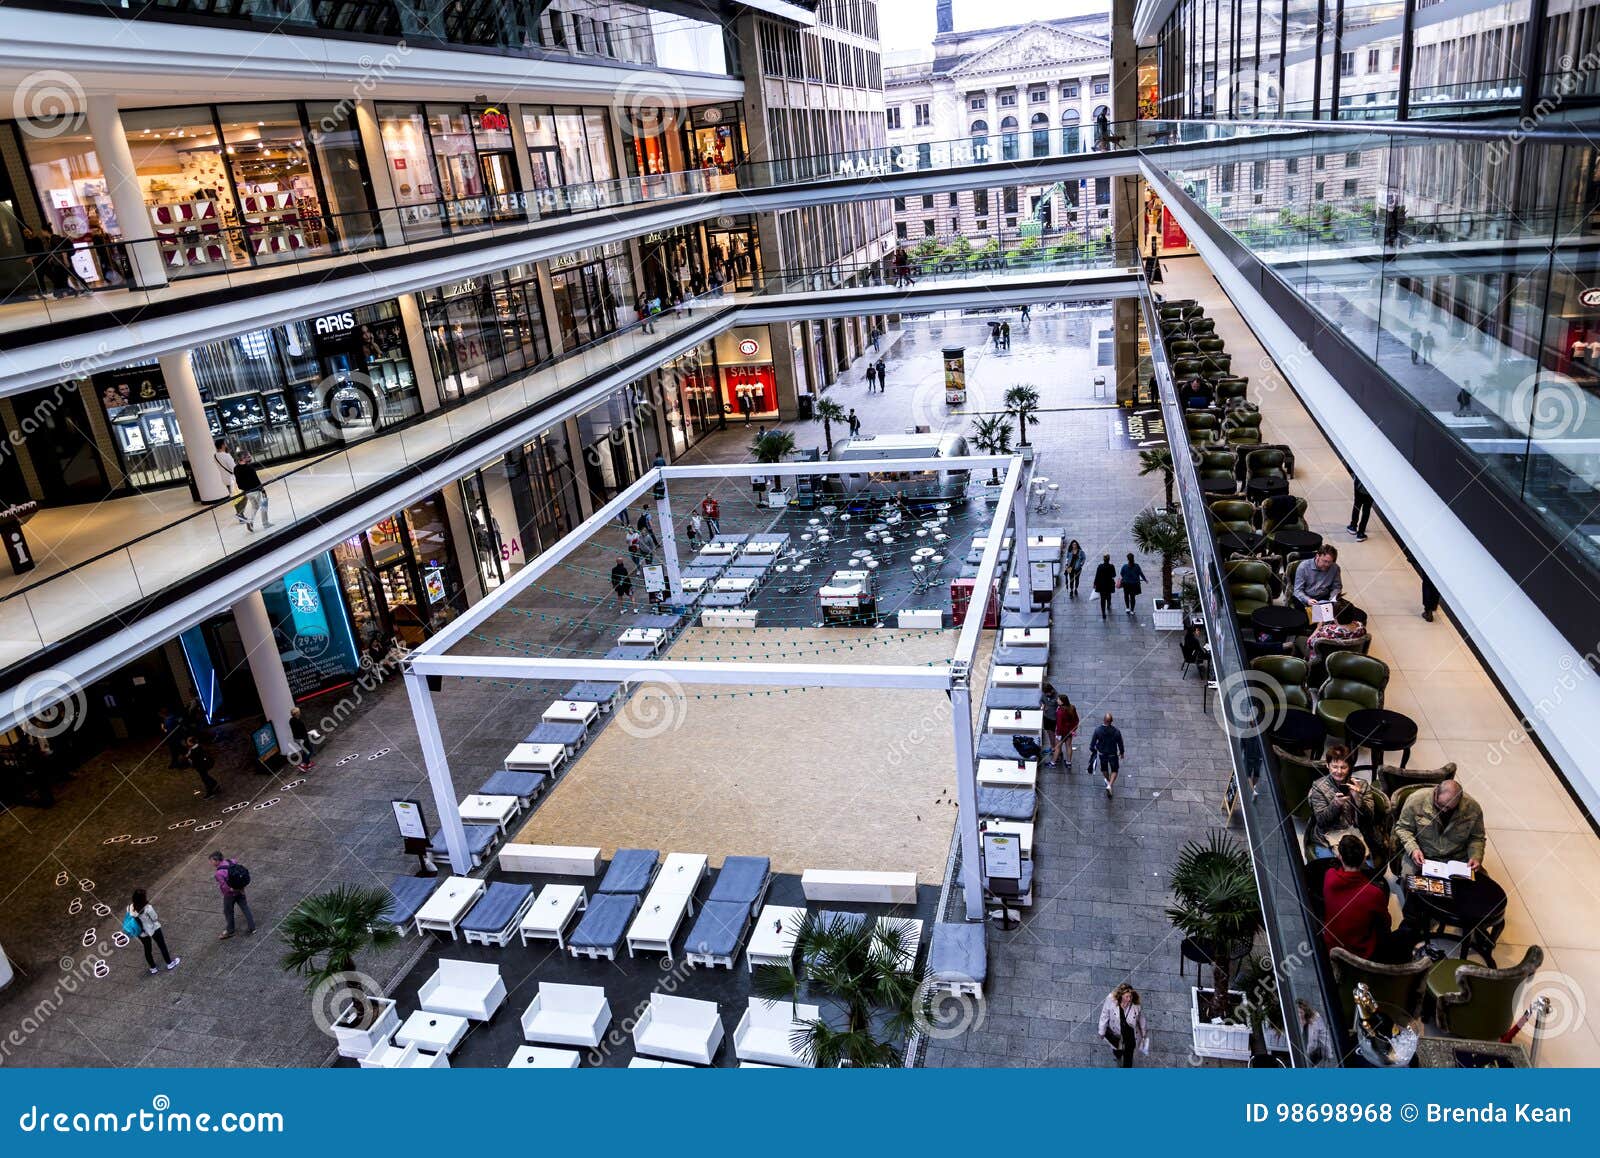 The Huge Complex of the Mall of Berlin is Located Near the Berlin